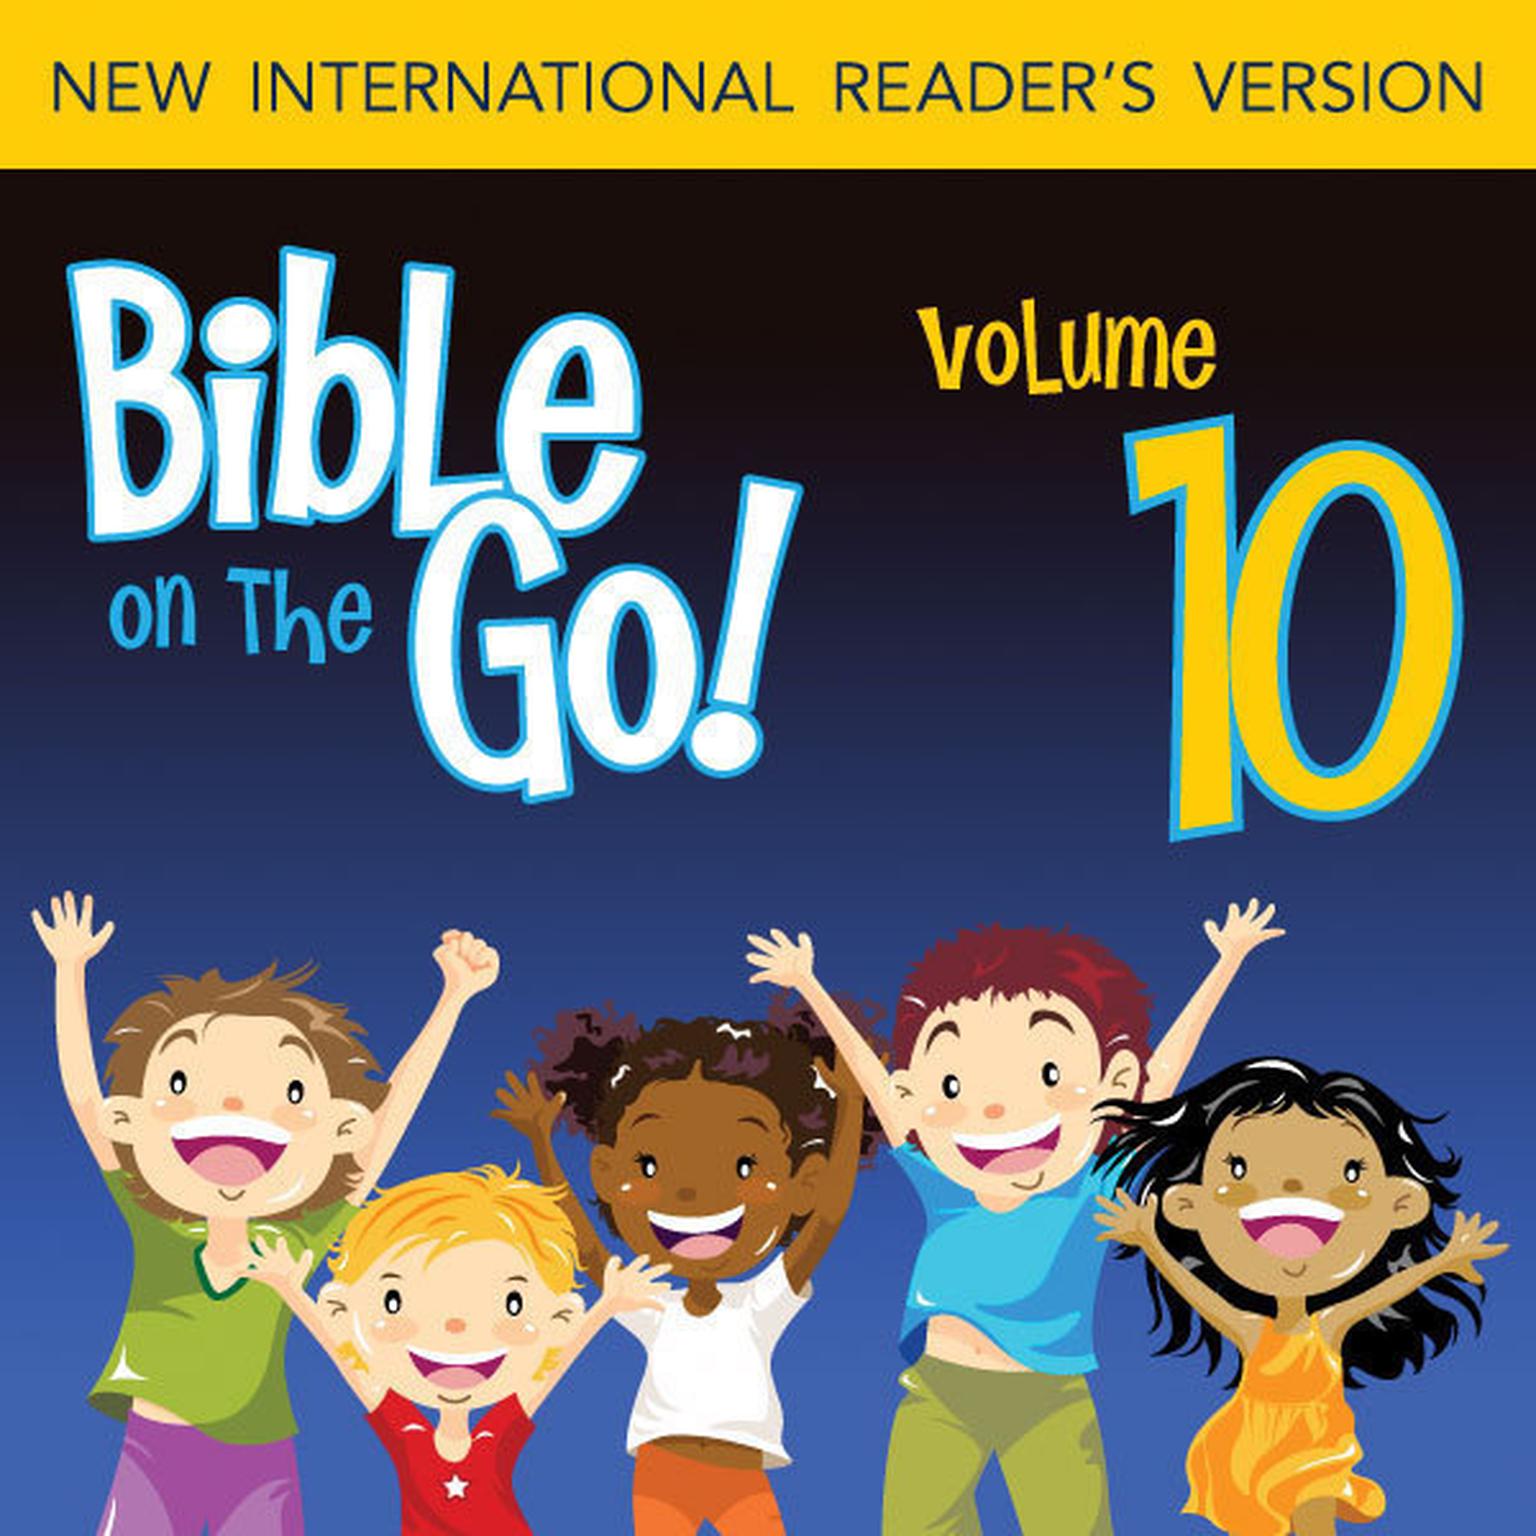 Bible on the Go Audio Bible - New International Readers Version, NIrV: Vol. 10 Report on the Promised Land; the Bronze Snake; and Baalams Donkey (Numbers 13-14, 21-22) Audiobook, by Zondervan